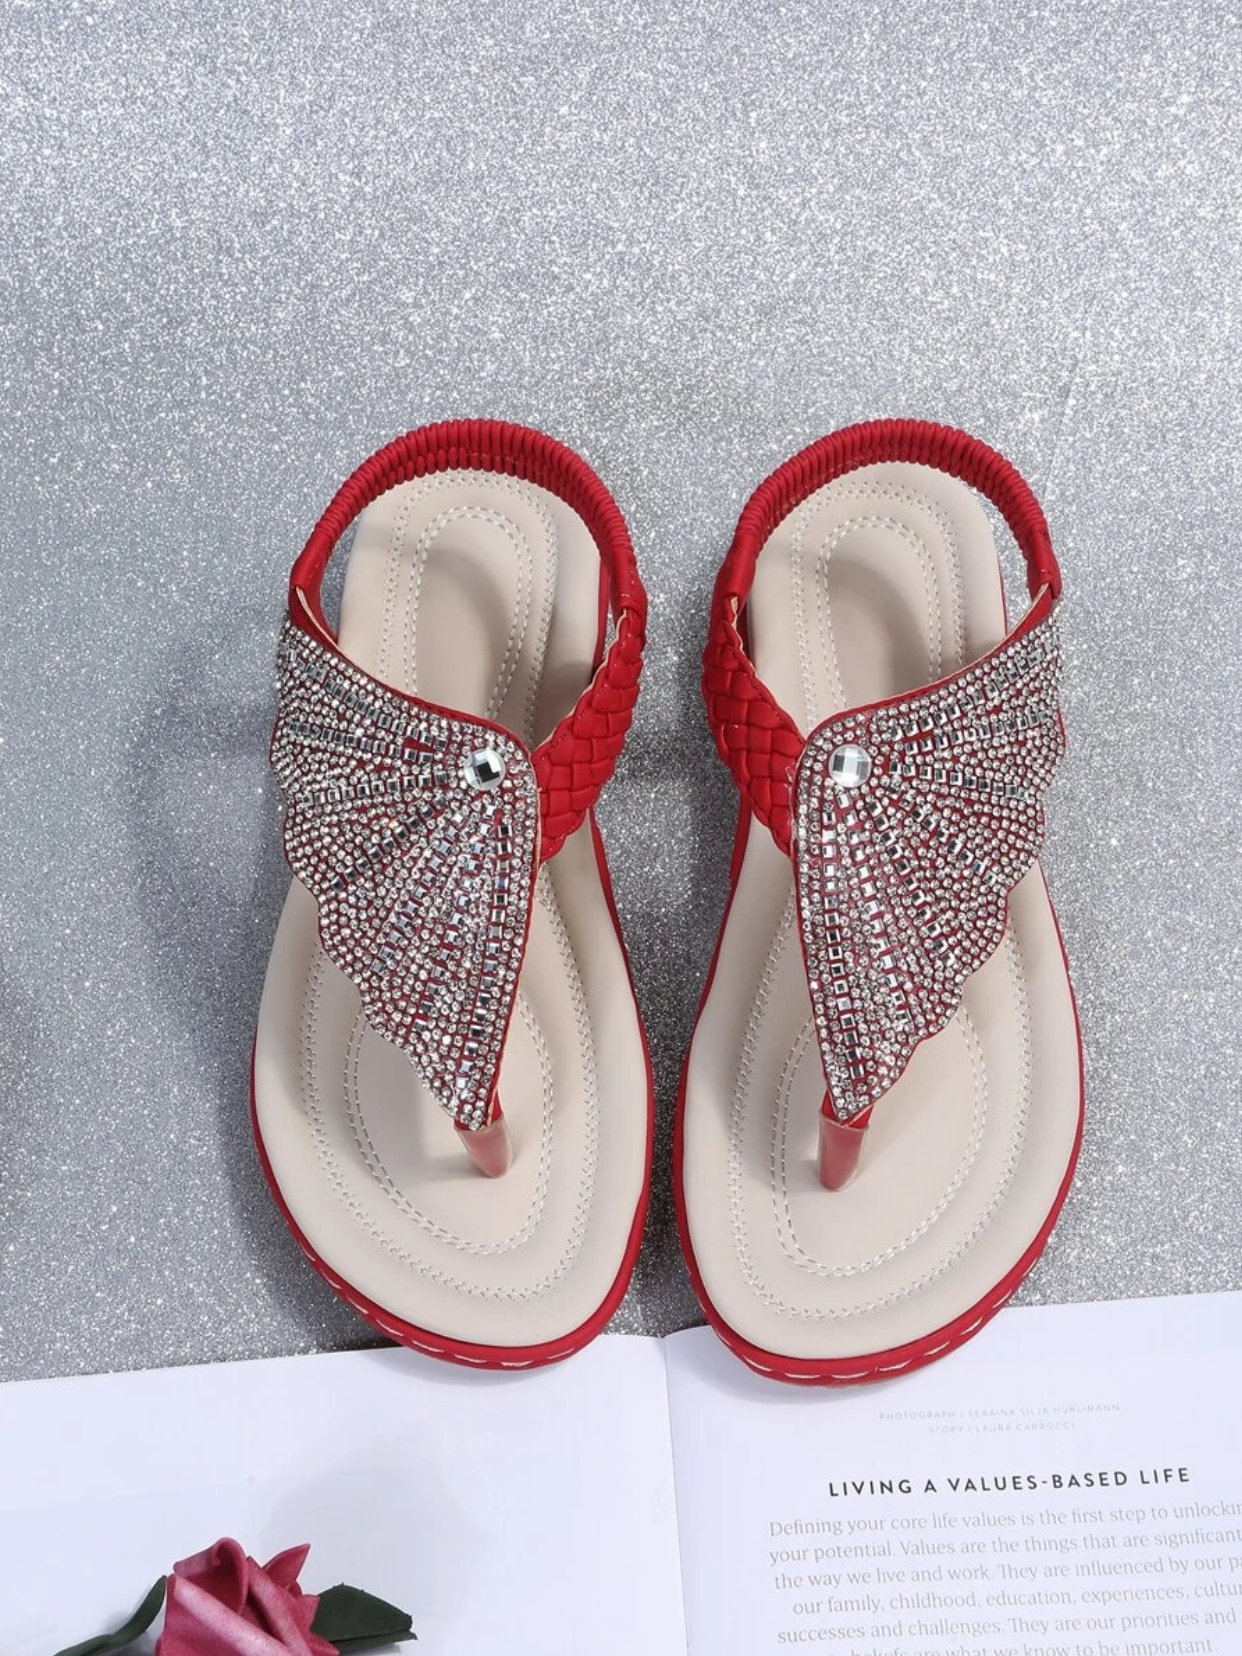 Women Casual Orthopedic Sandals, Crystal Rome Fashion Clip Toe Slippers [Limited time offer: Buy 2 Save More 15%]